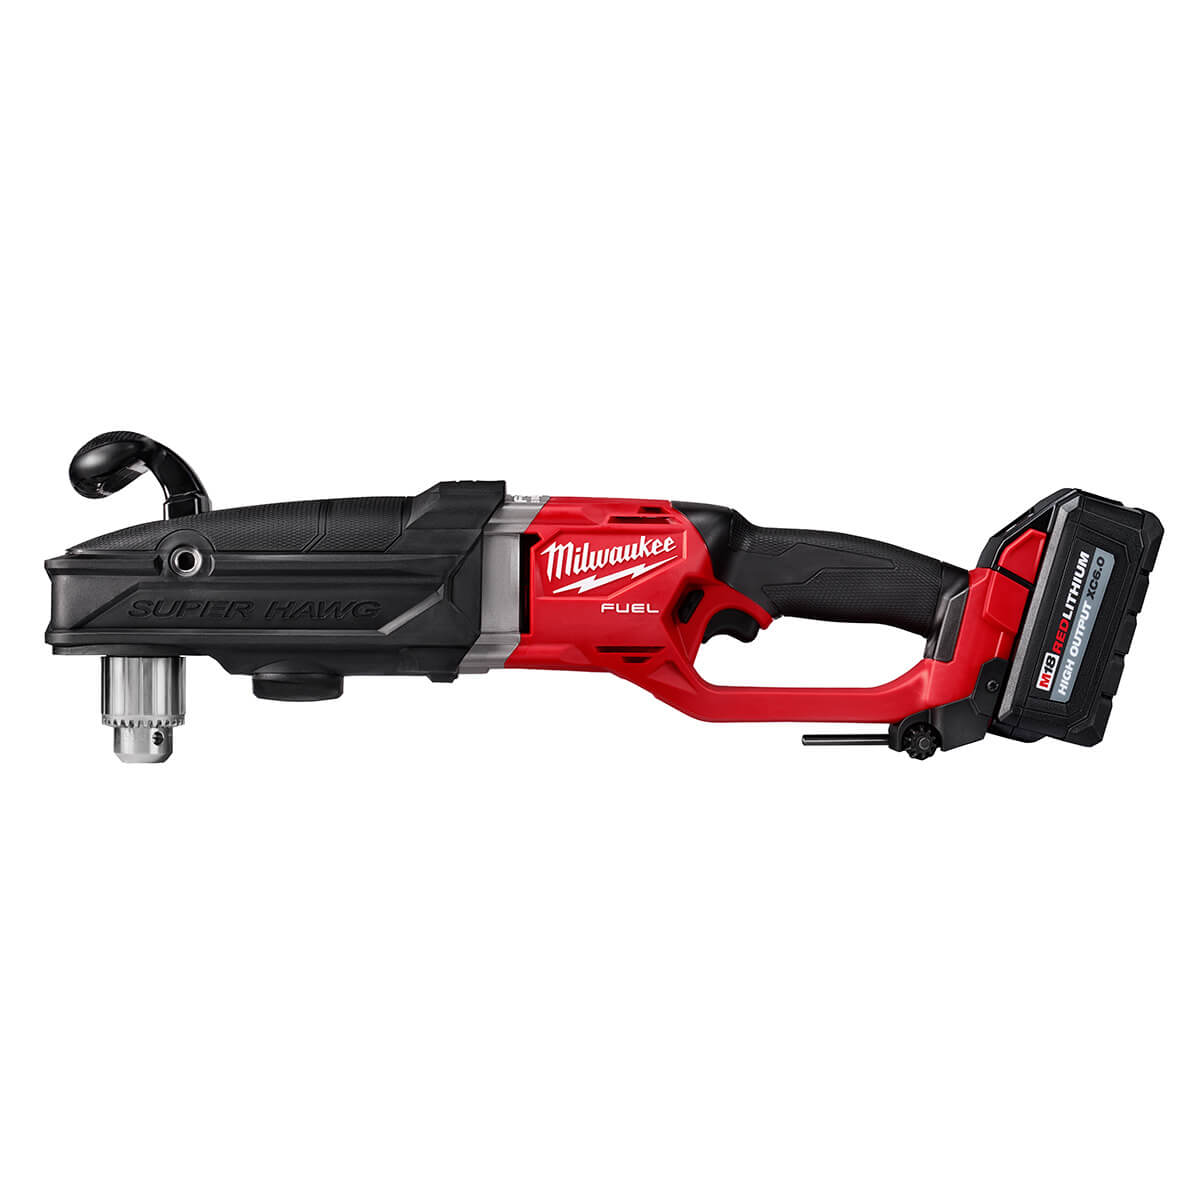 Milwaukee 2809-22 - M18 FUEL™ SUPER HAWG™ 1/2" Right Angle Drill Kit - wise-line-tools